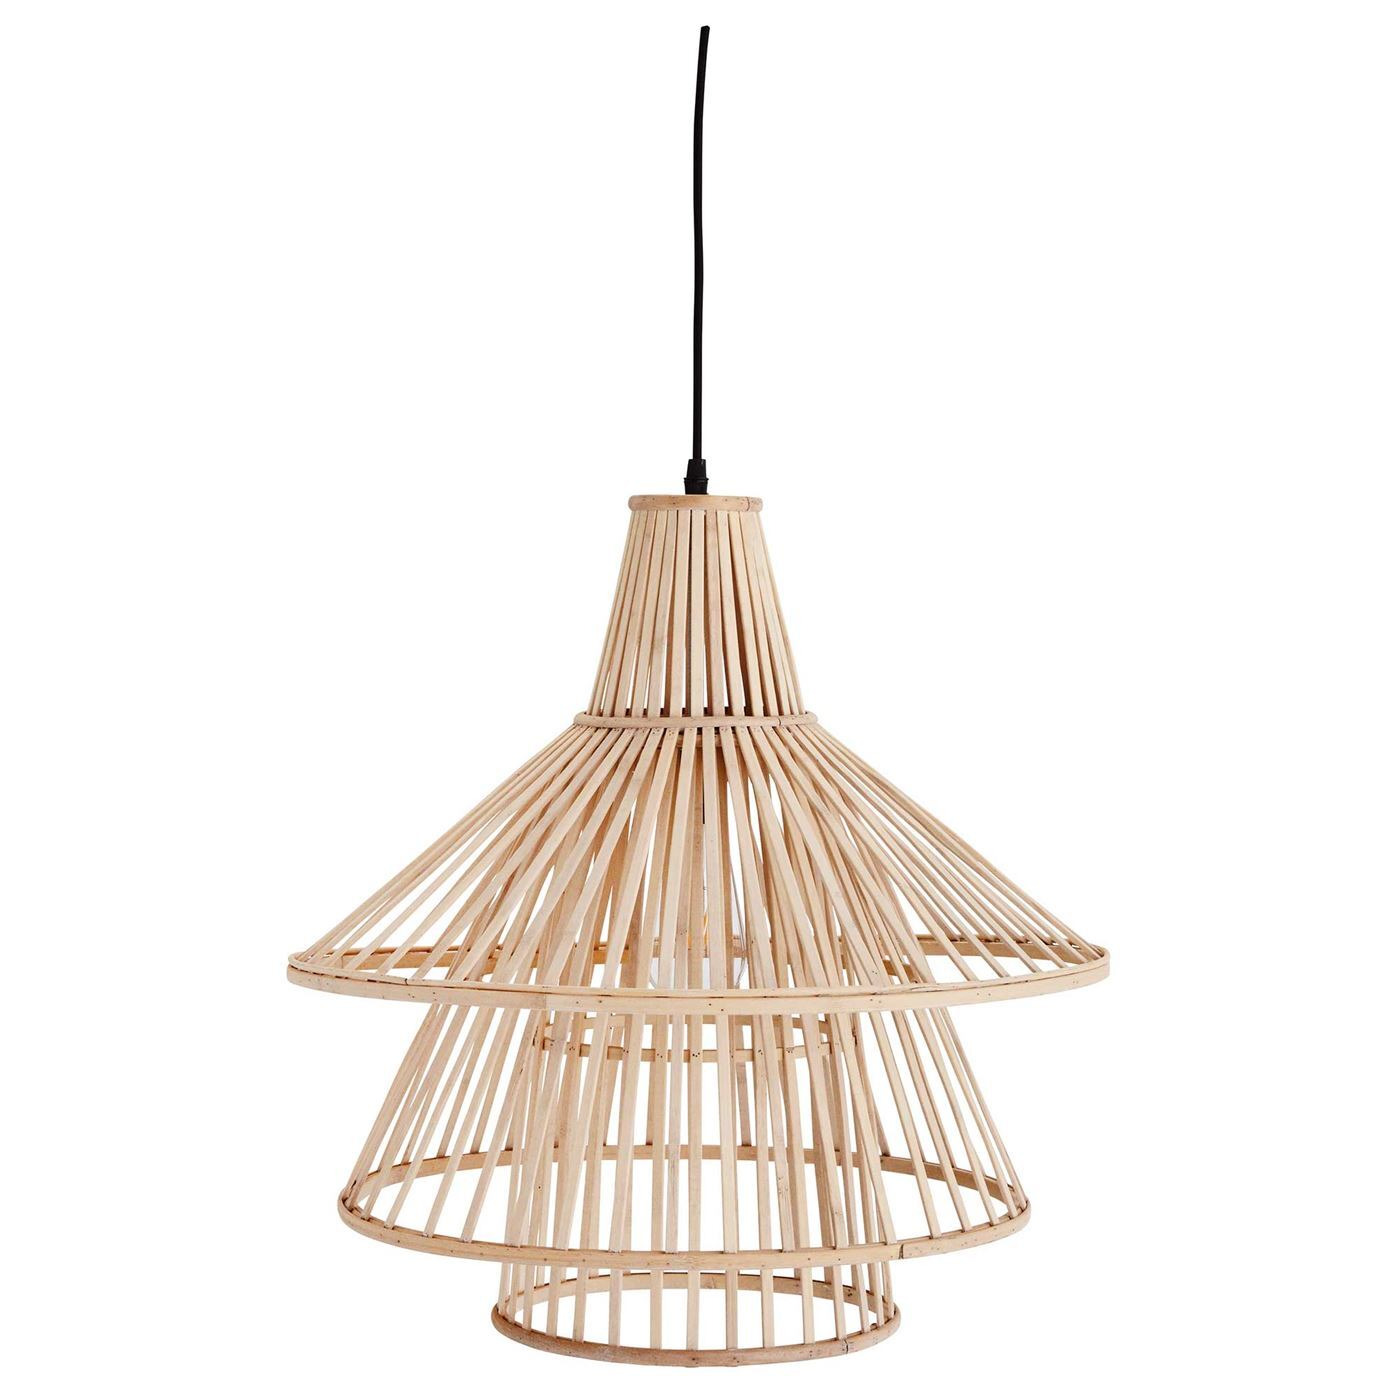 Bamboo Tiered Pendant Light, Neutral Wood - Barker & Stonehouse - image 1